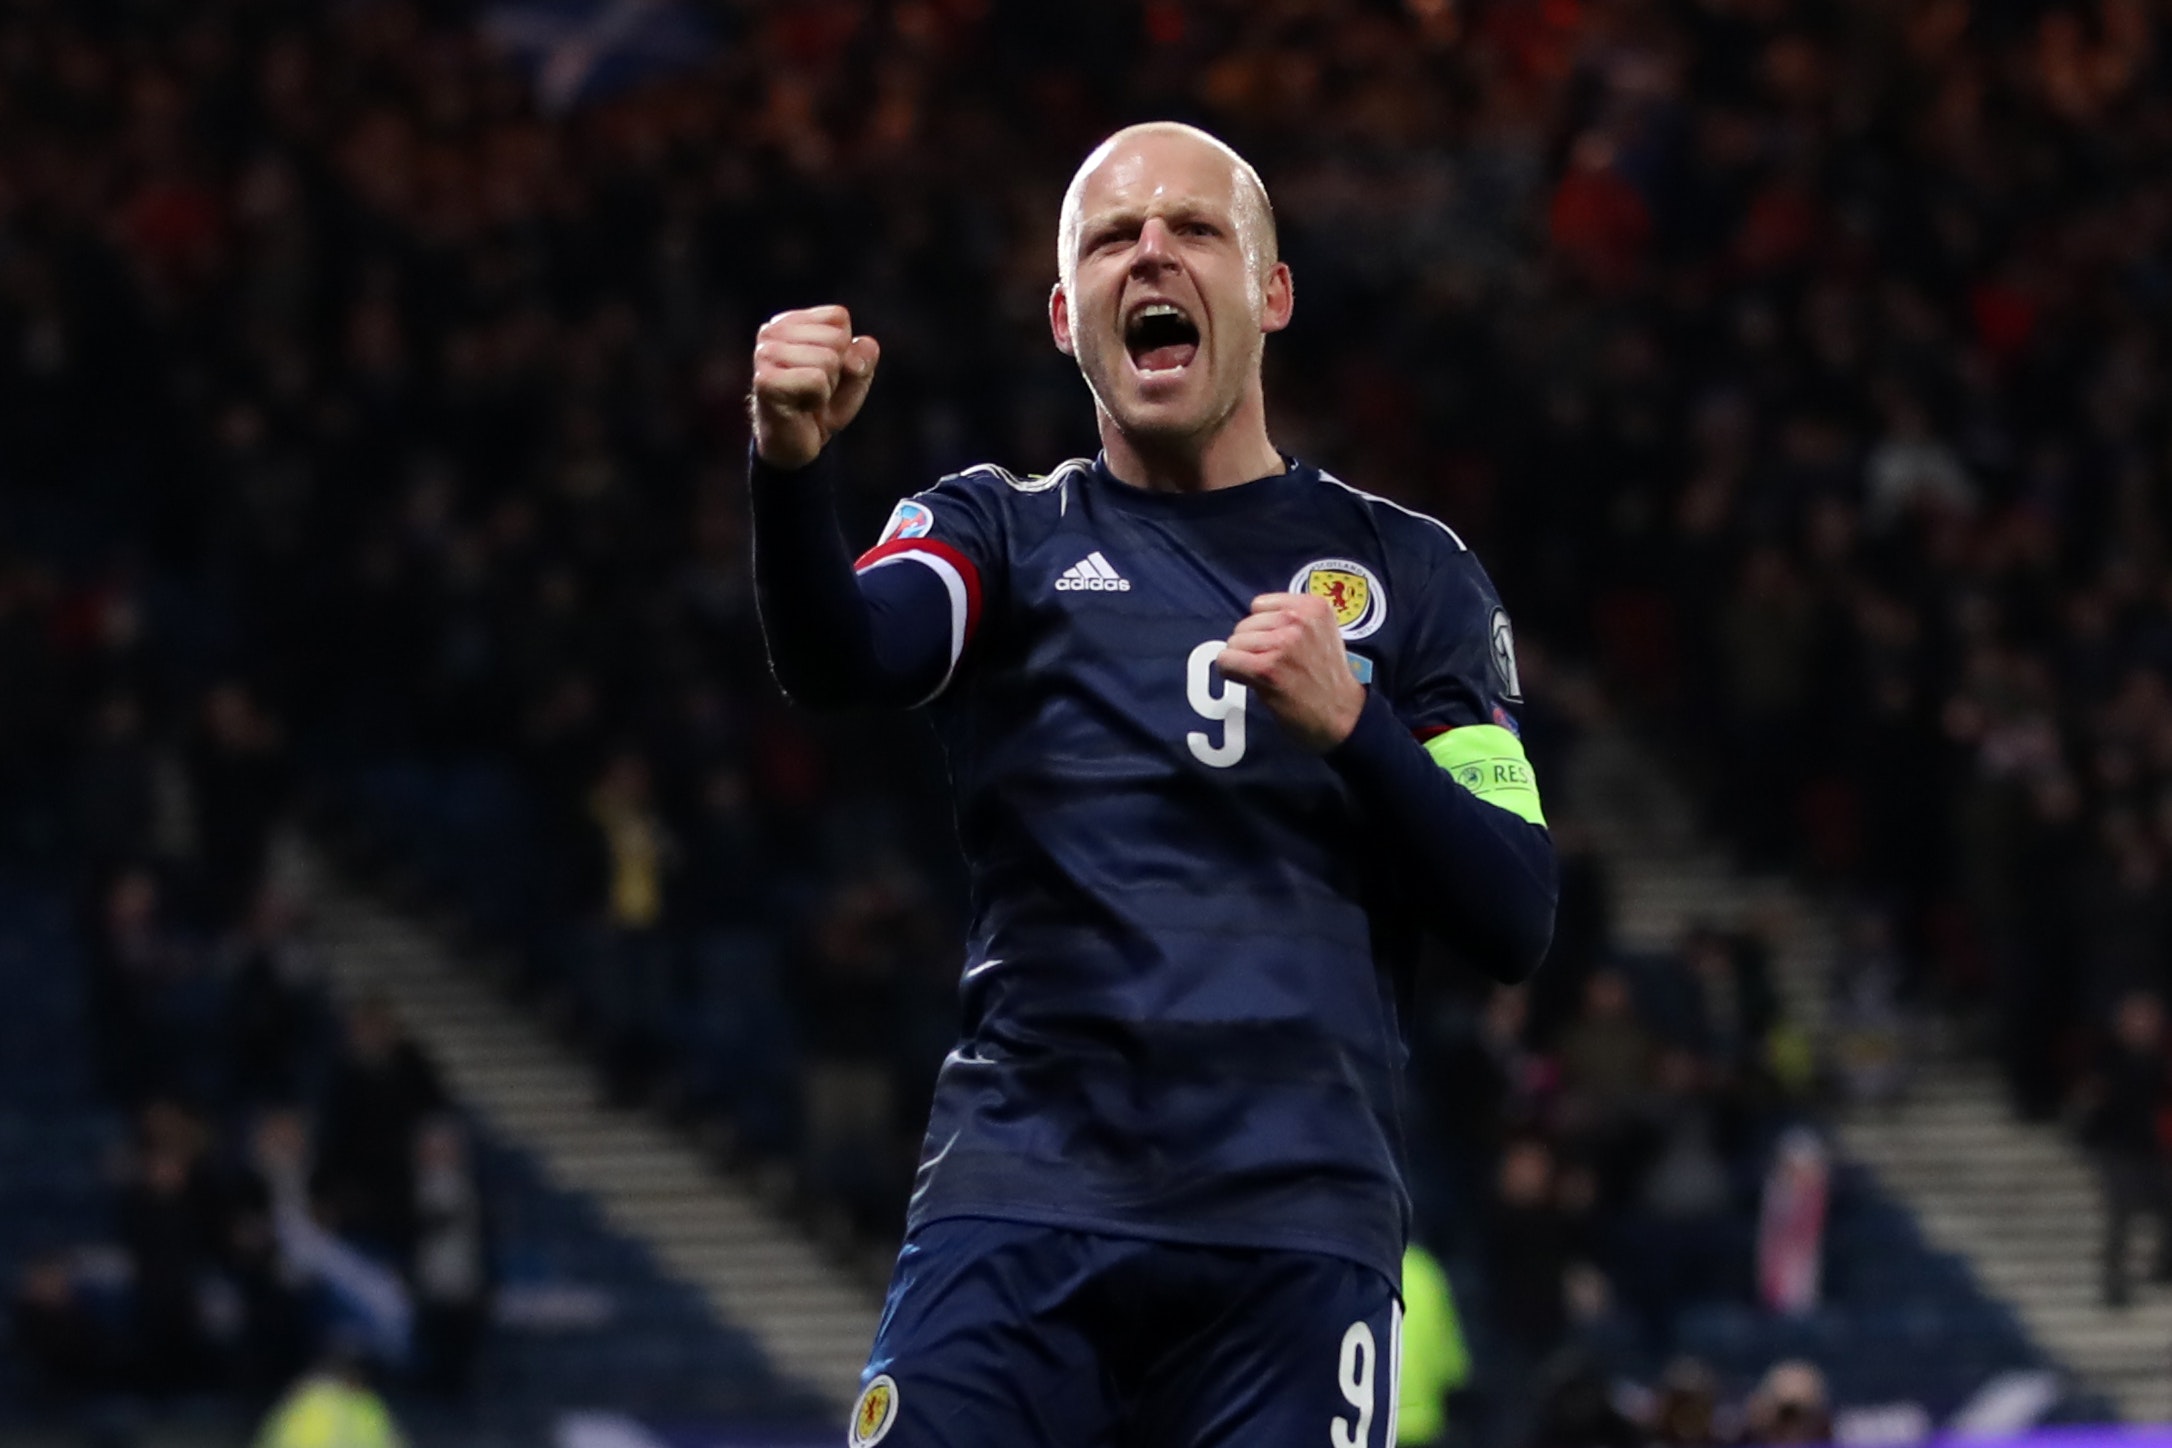 Scotland sign off with victory over Kazakhstan - This Is Wiltshire